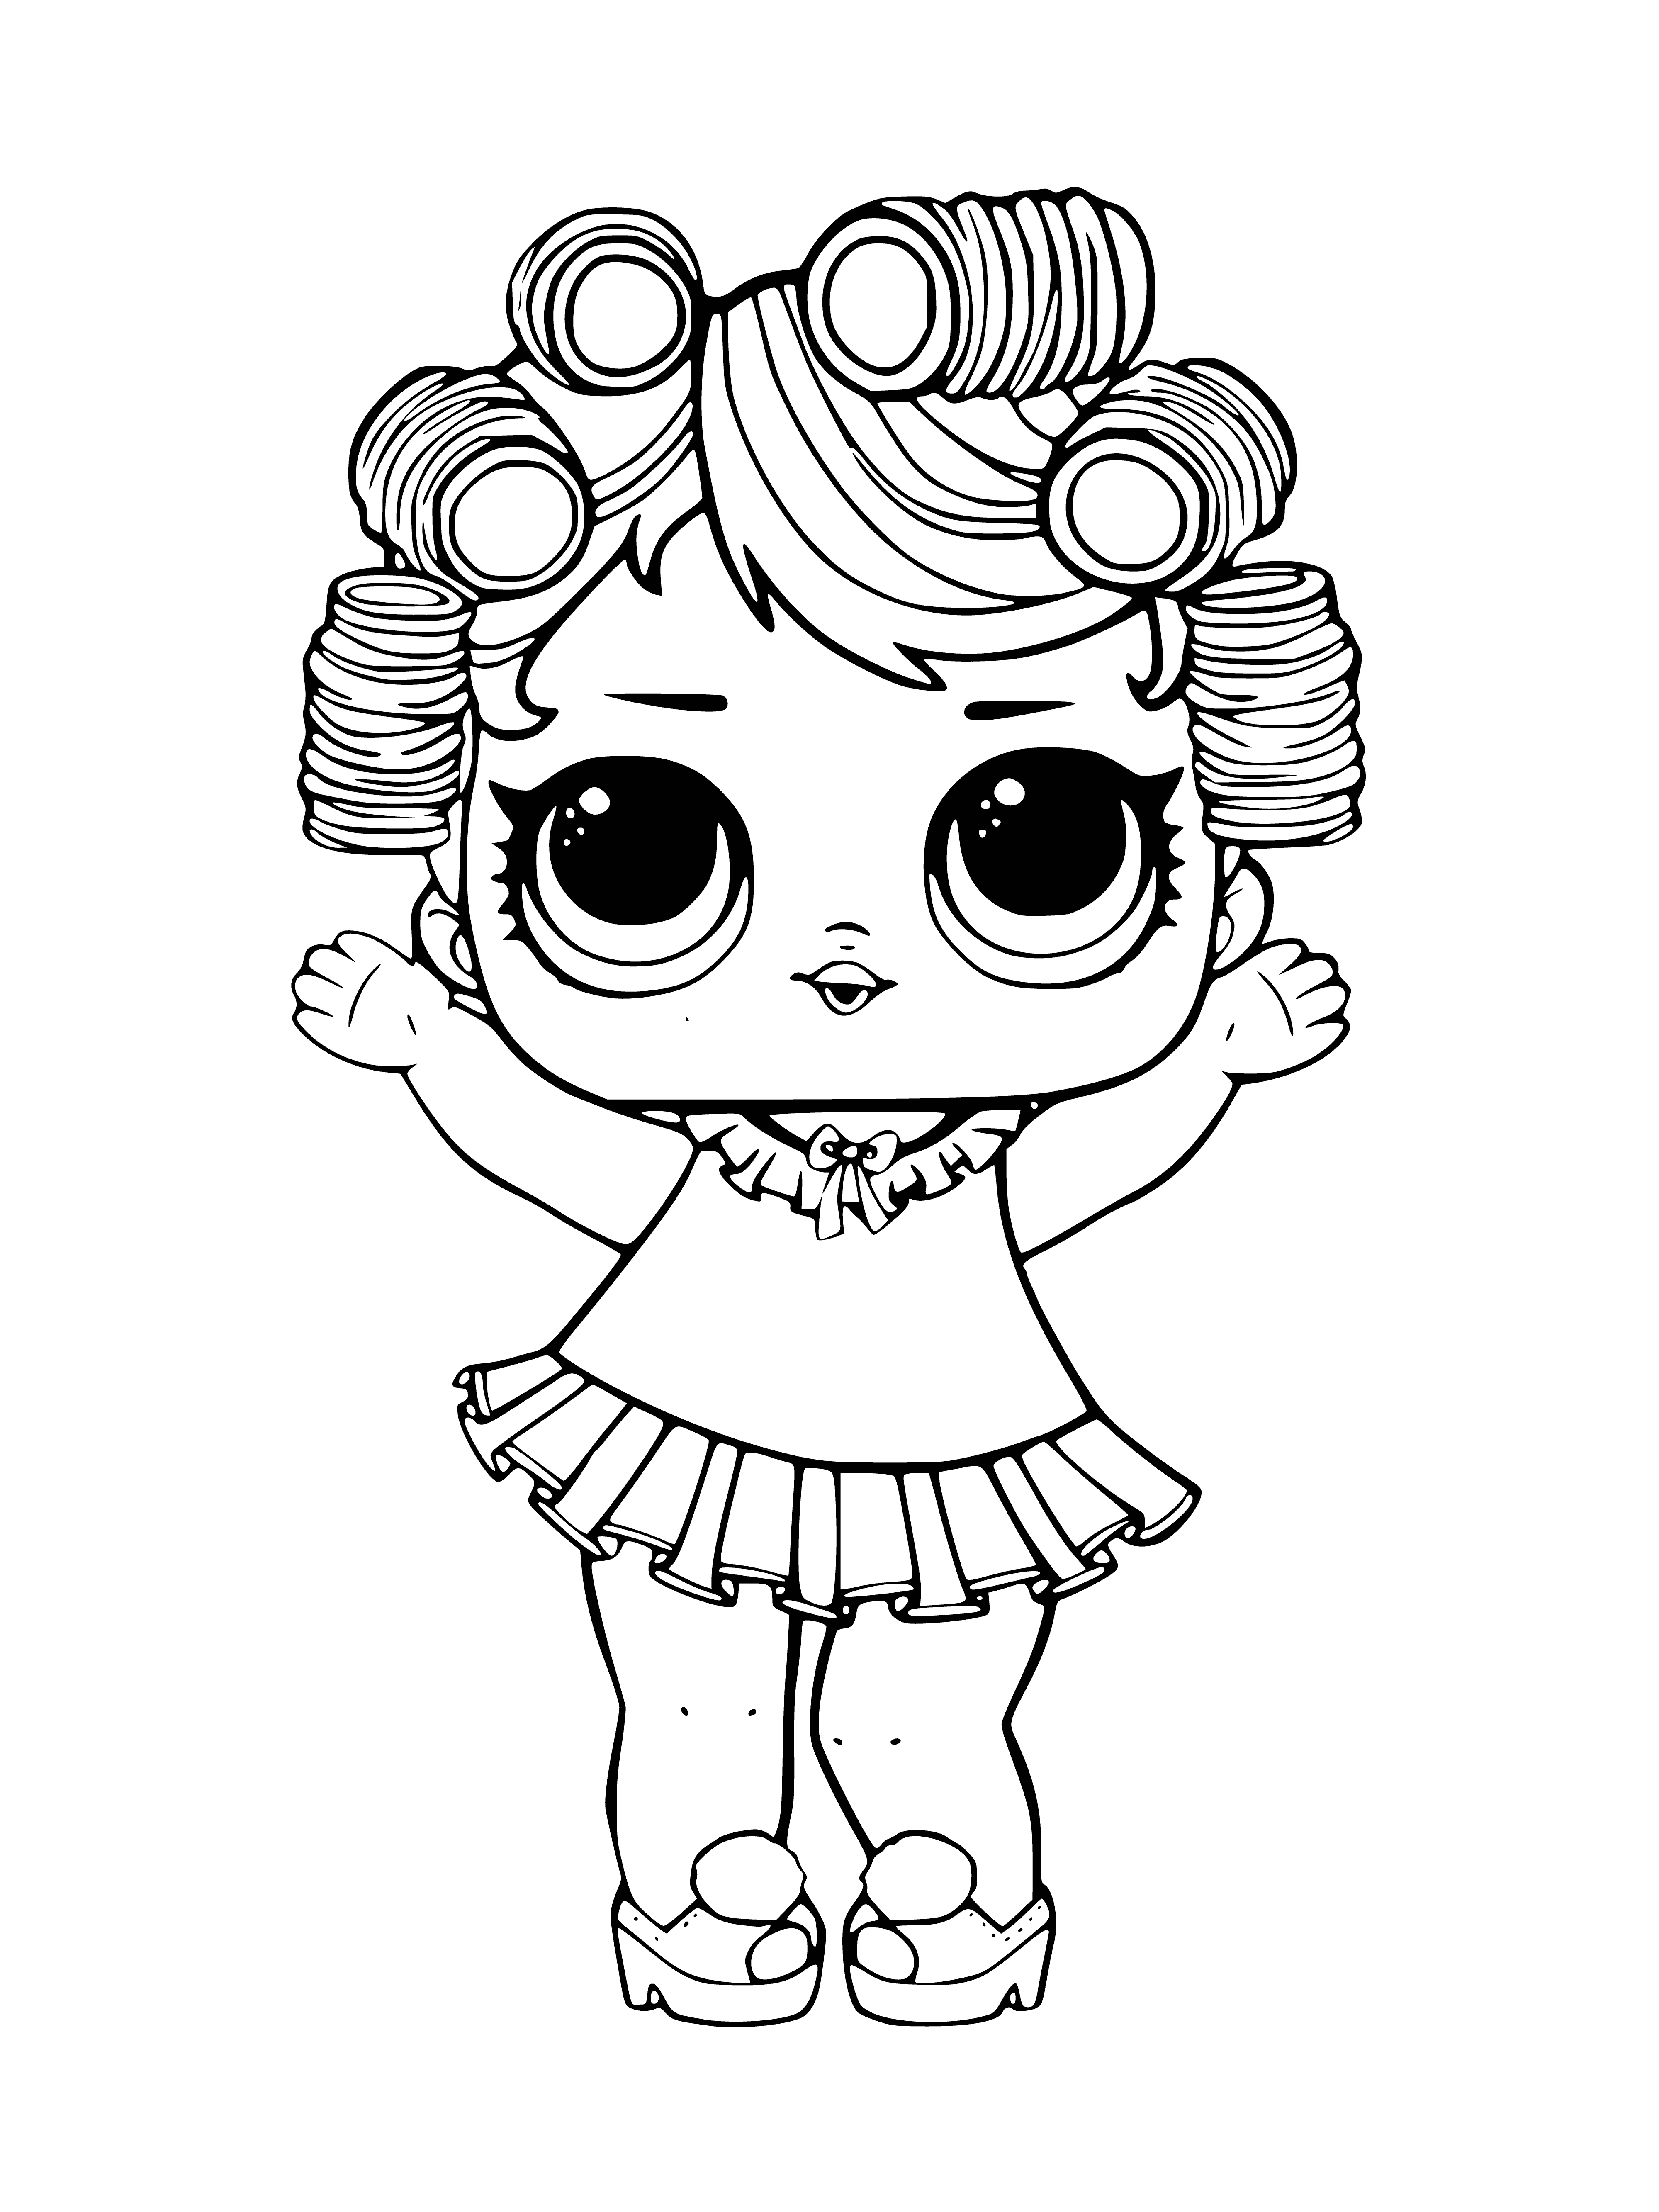 coloring page: A toy baby doll with blond hair, blue eyes and a white dress with blue collar and a purple bow is surrounded by pink, blue and purple confetti. #coloring #toybabydoll